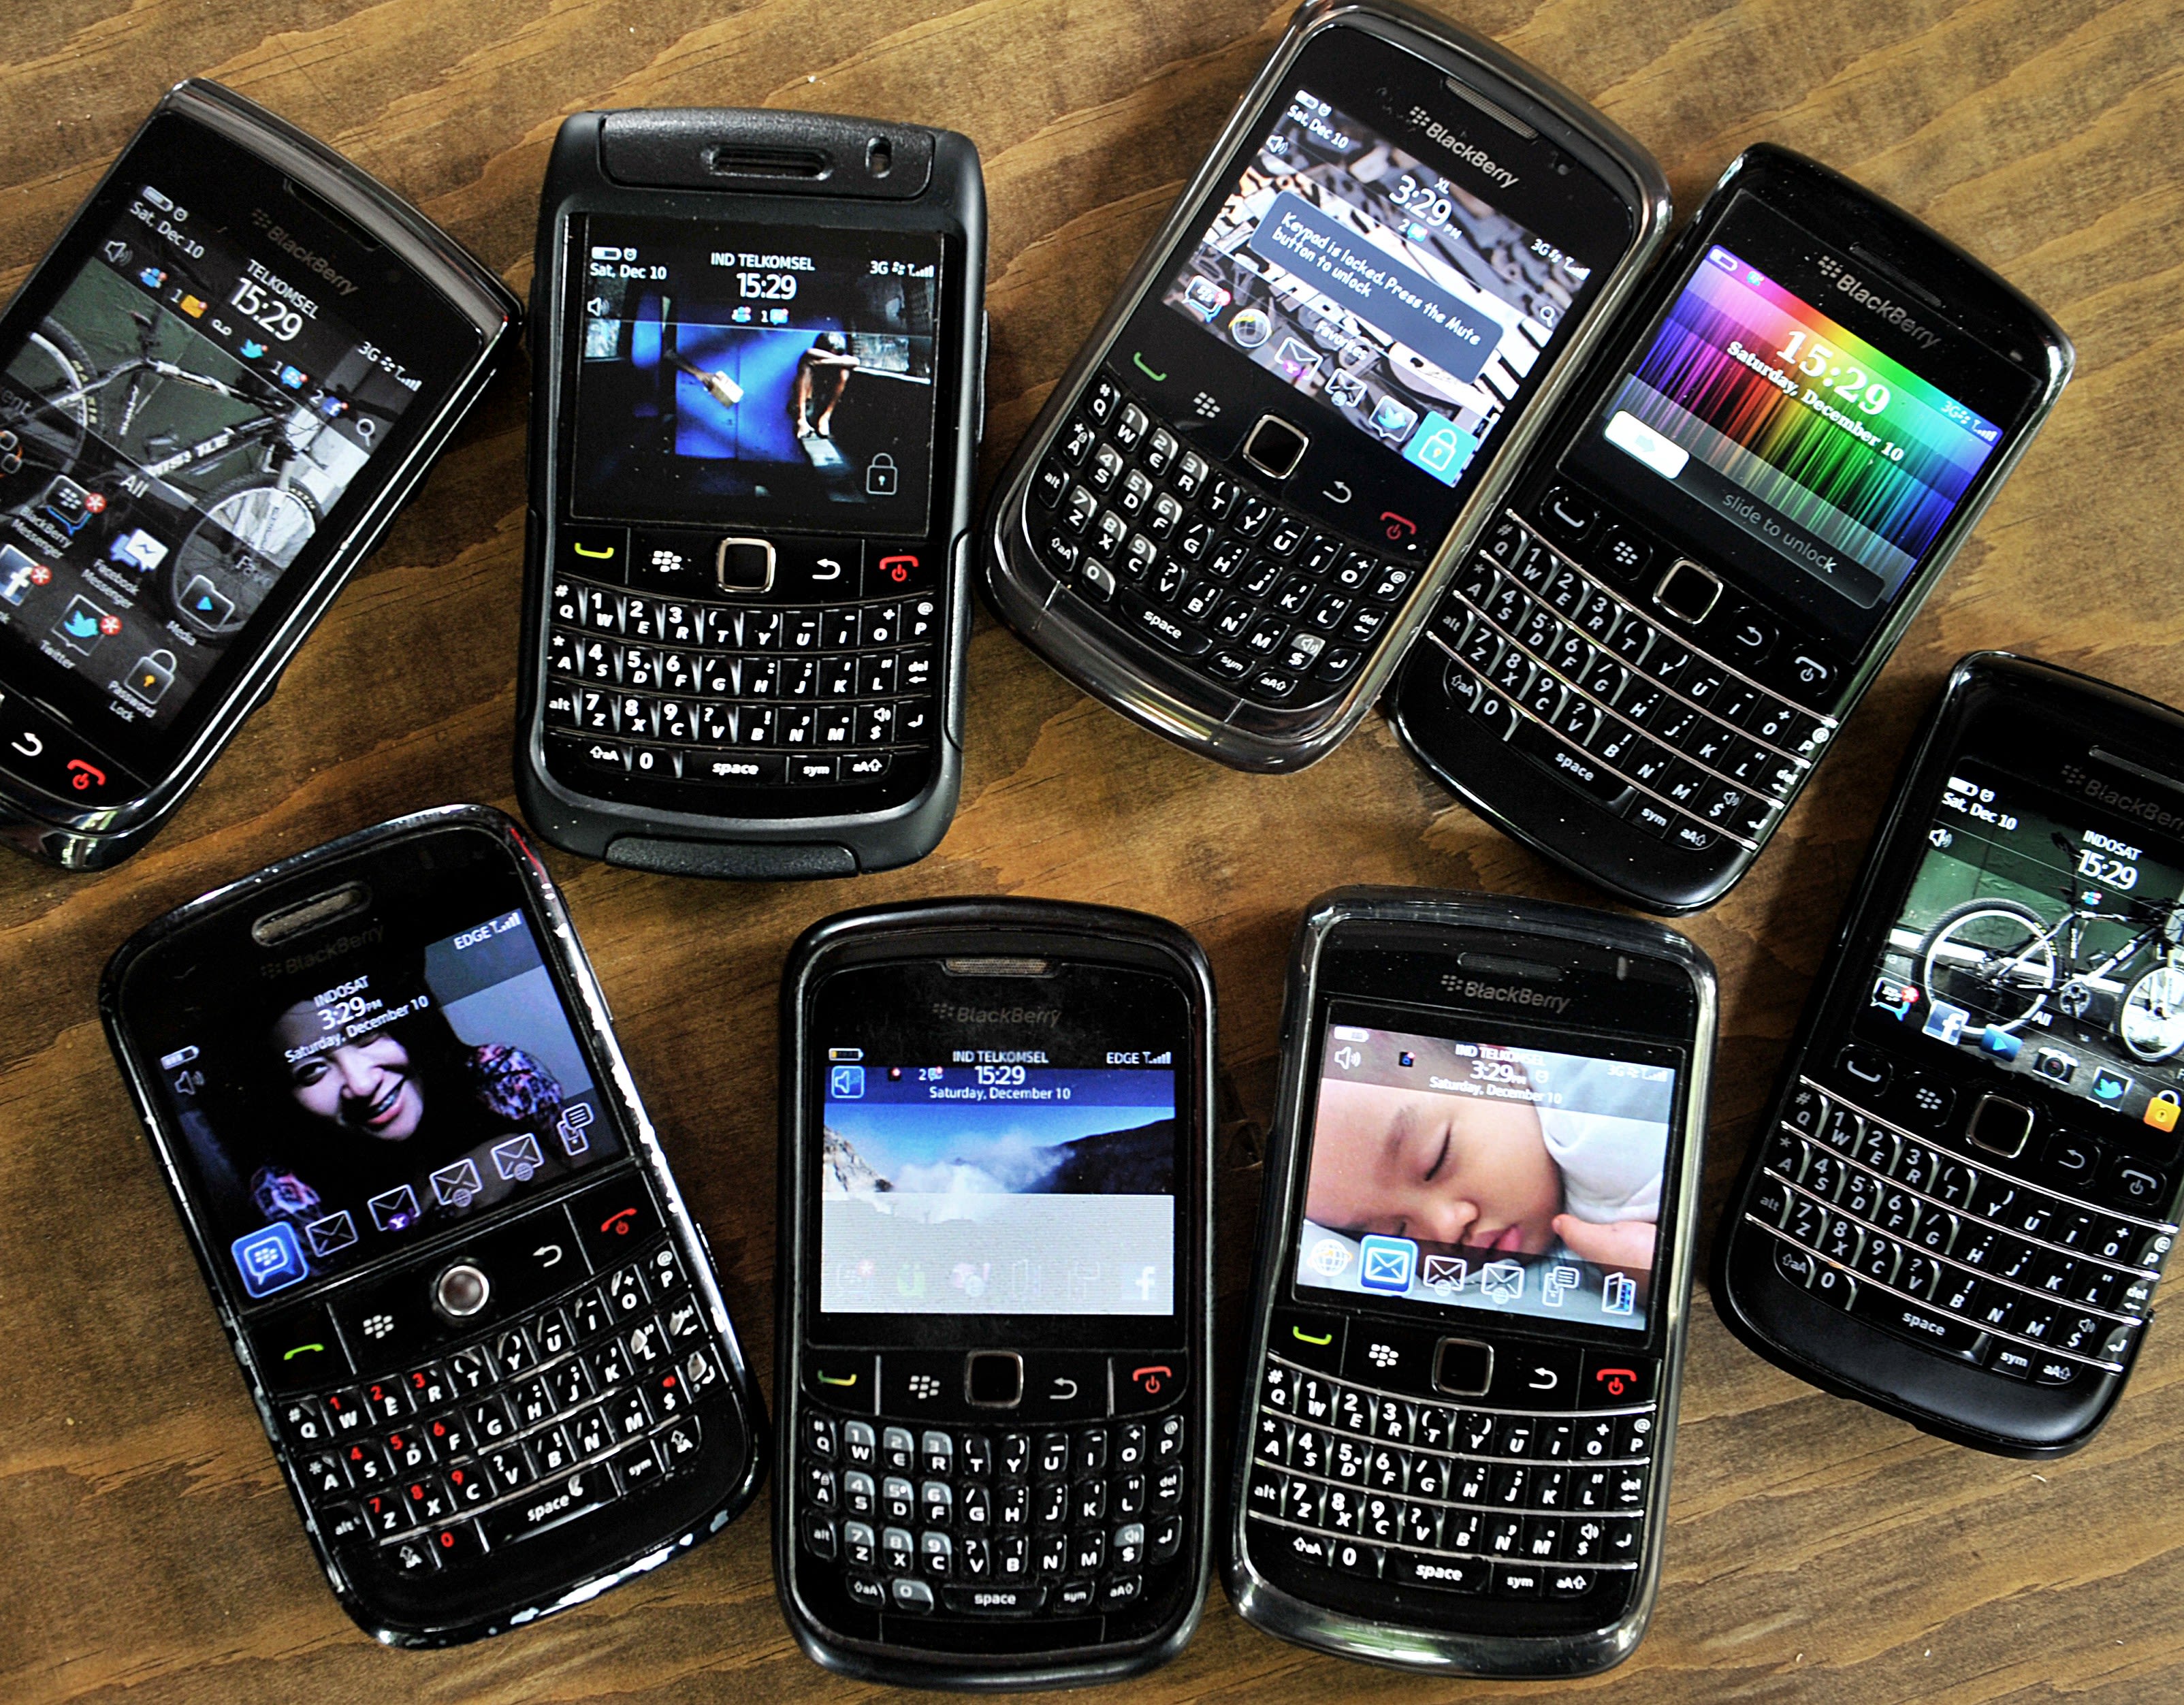 BlackBerry: A product history